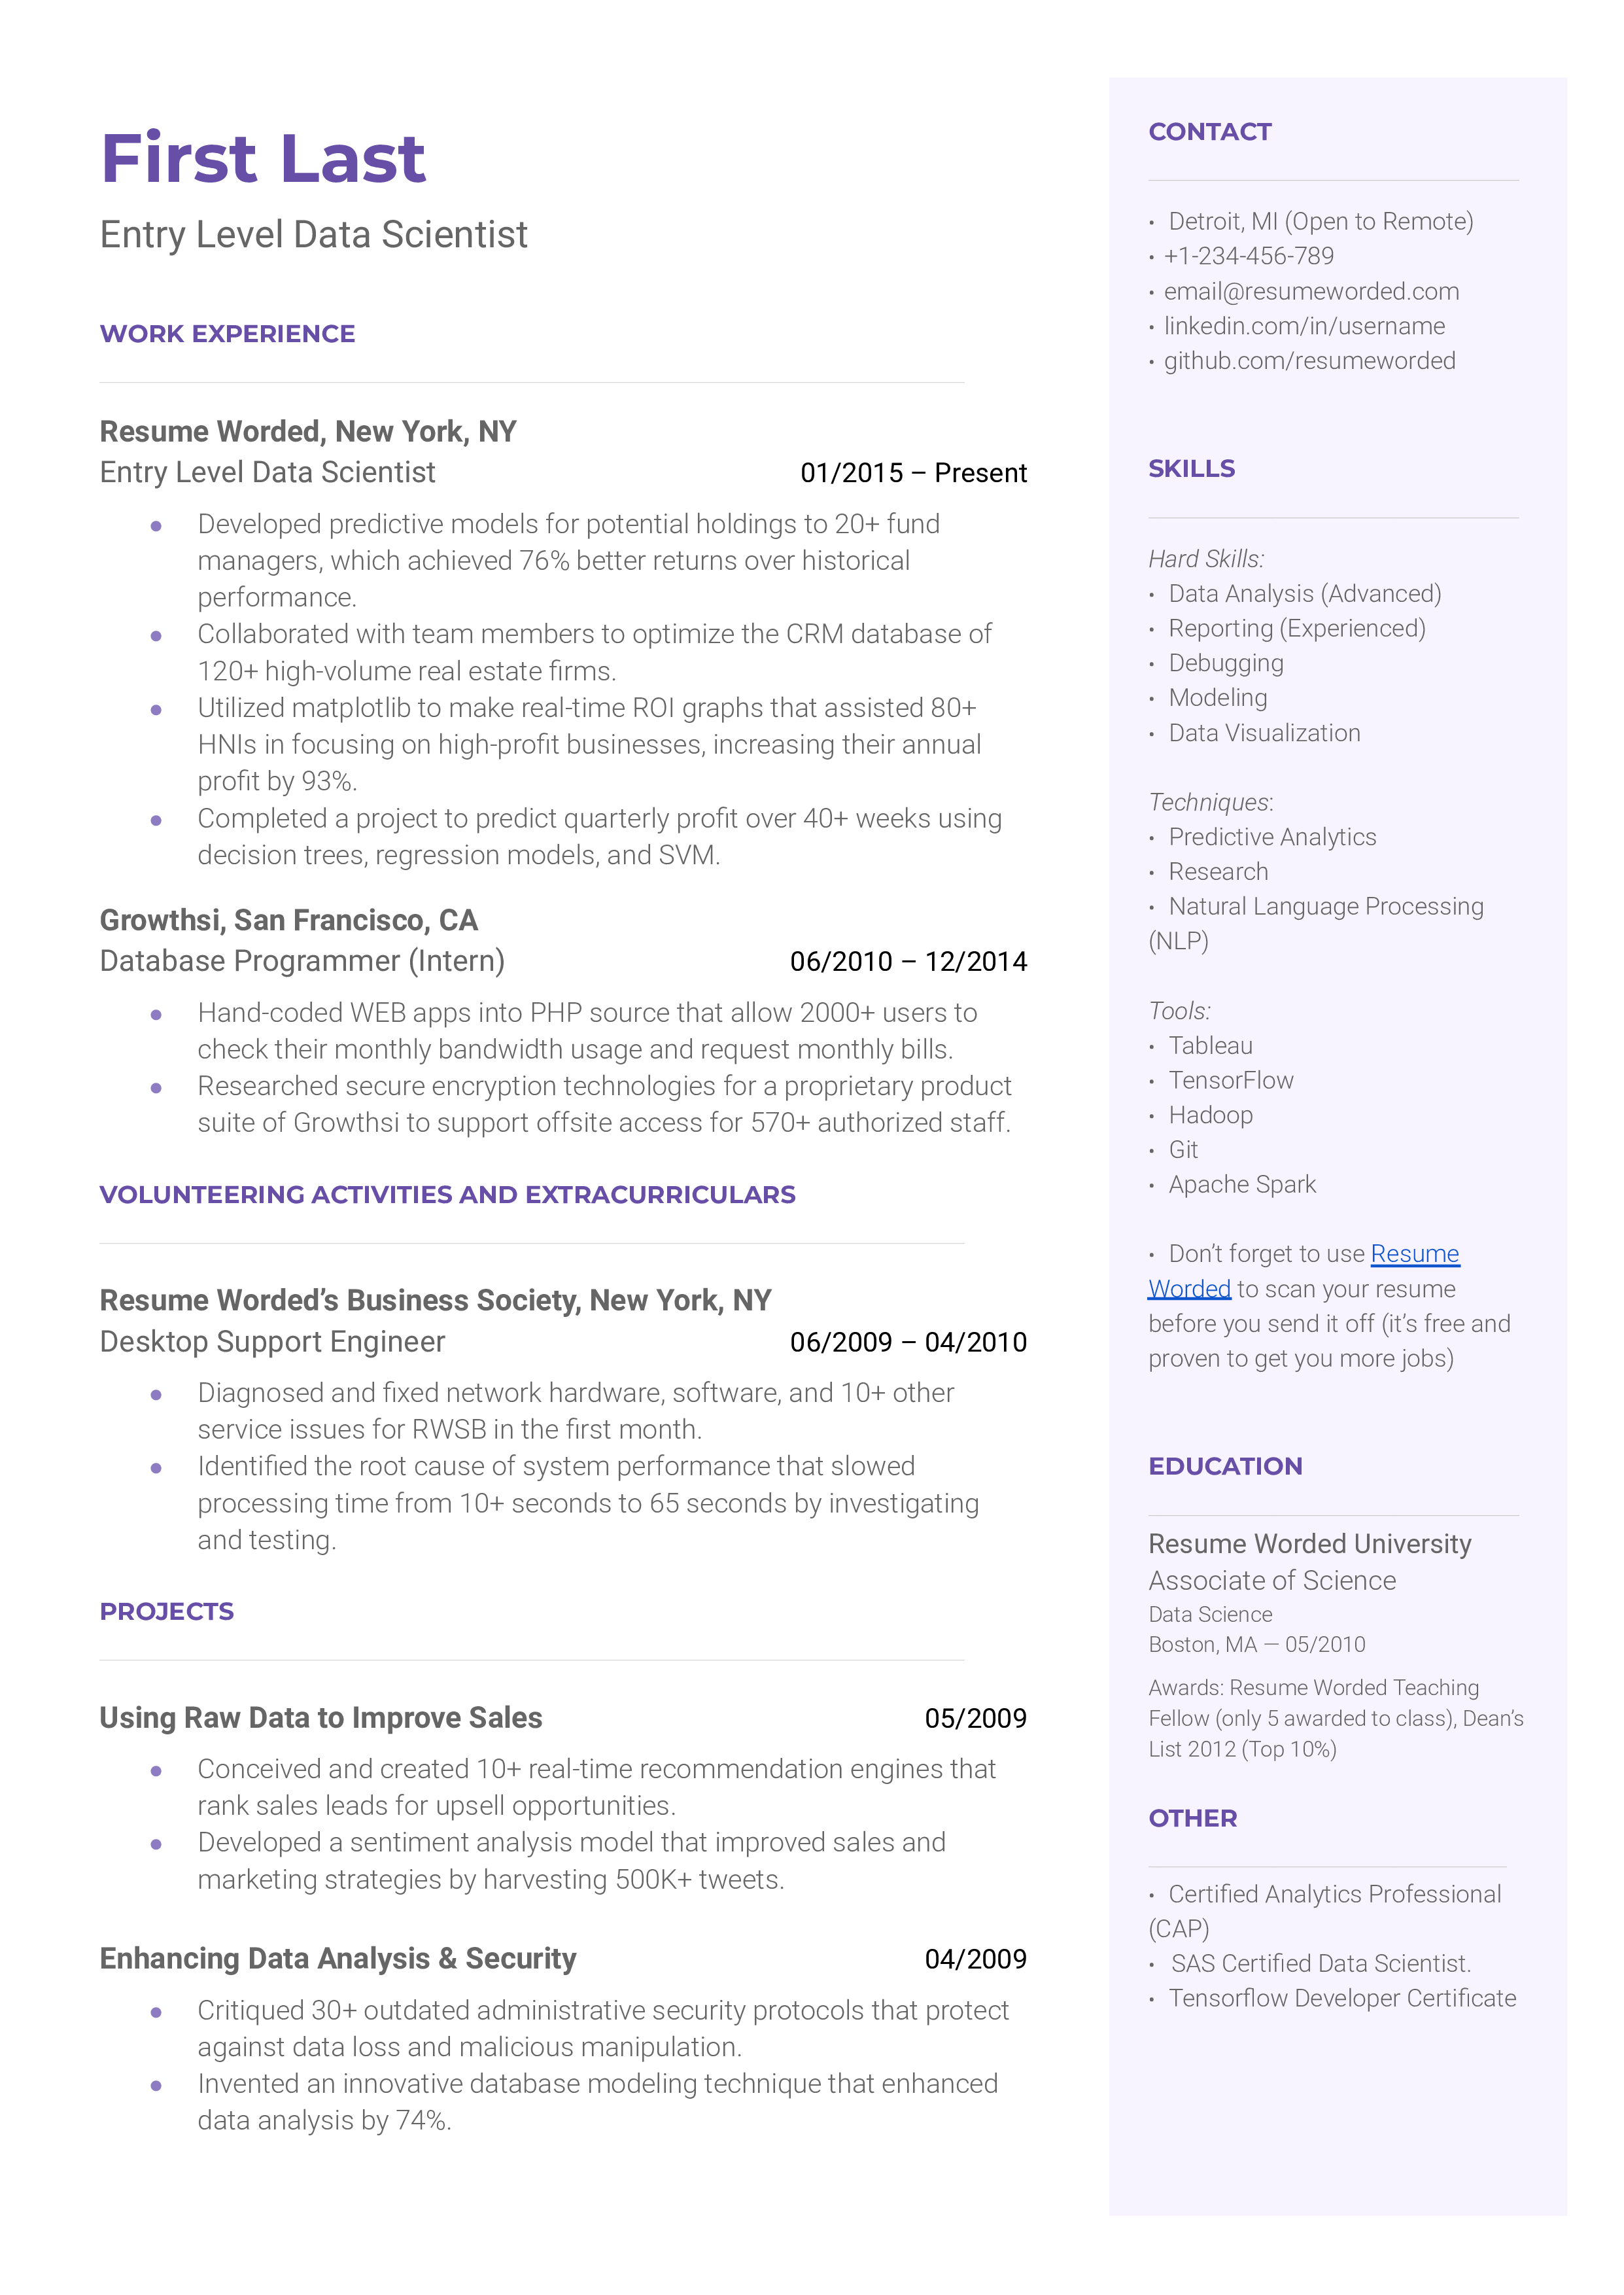 Alt text: A CV screenshot illustrating the application for an entry-level data scientist role.